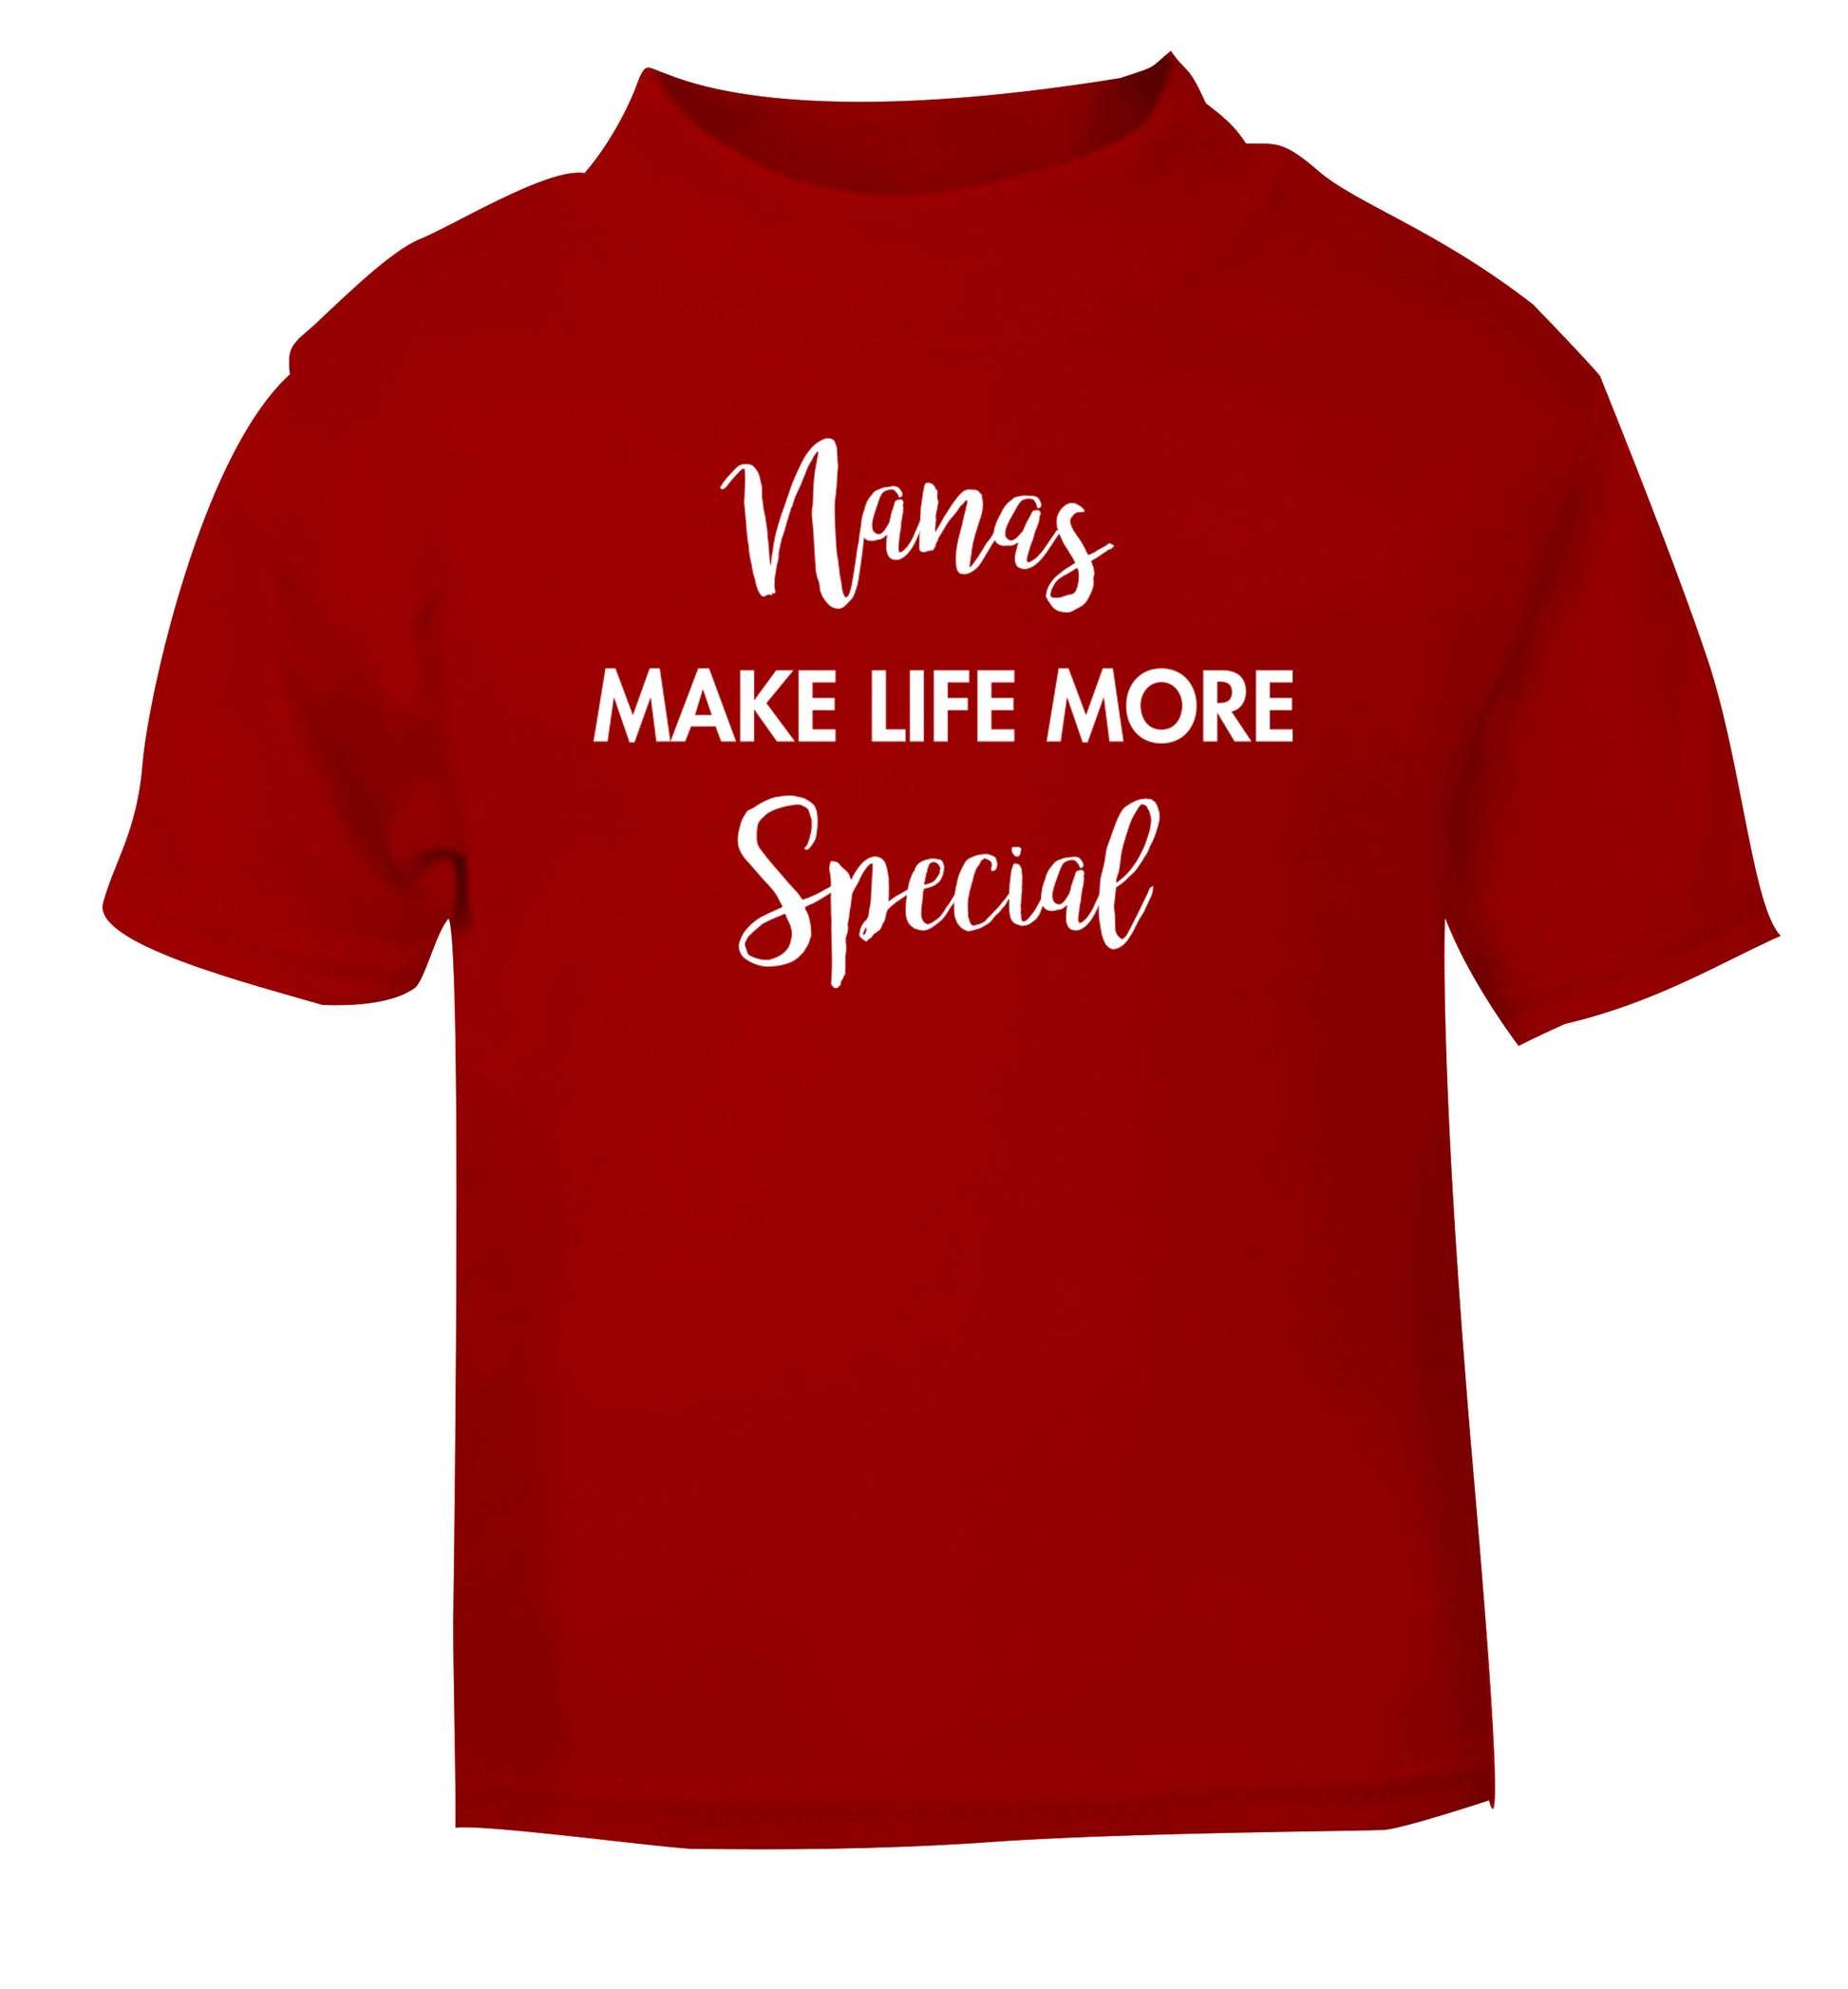 Nanas make life more special red Baby Toddler Tshirt 2 Years